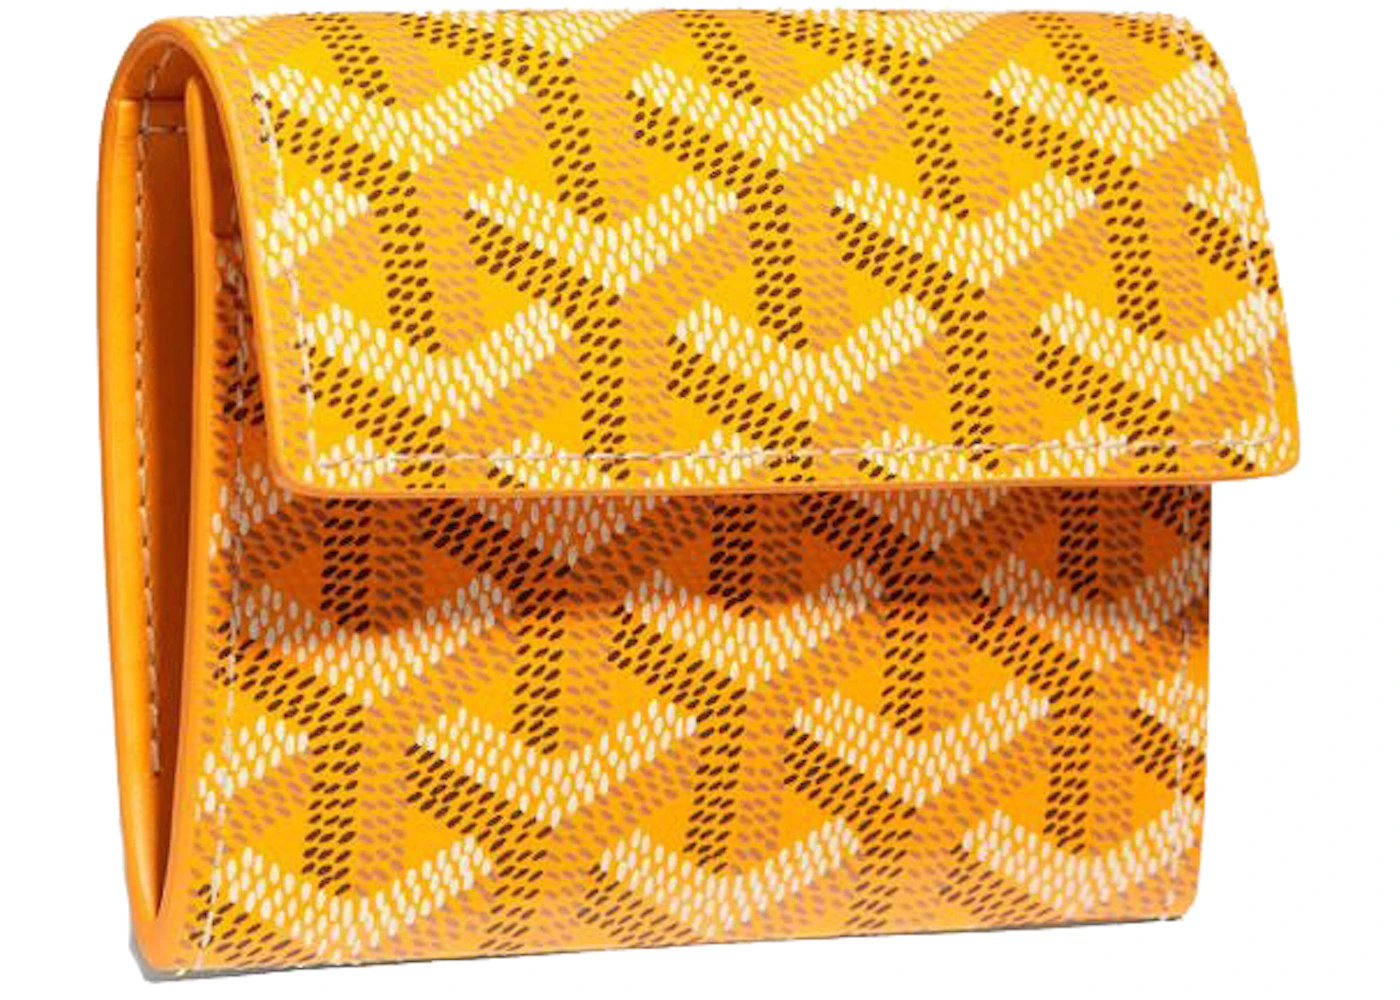 Goyard Marigny Wallet Yellow in Canvas/Calfskin Leather with